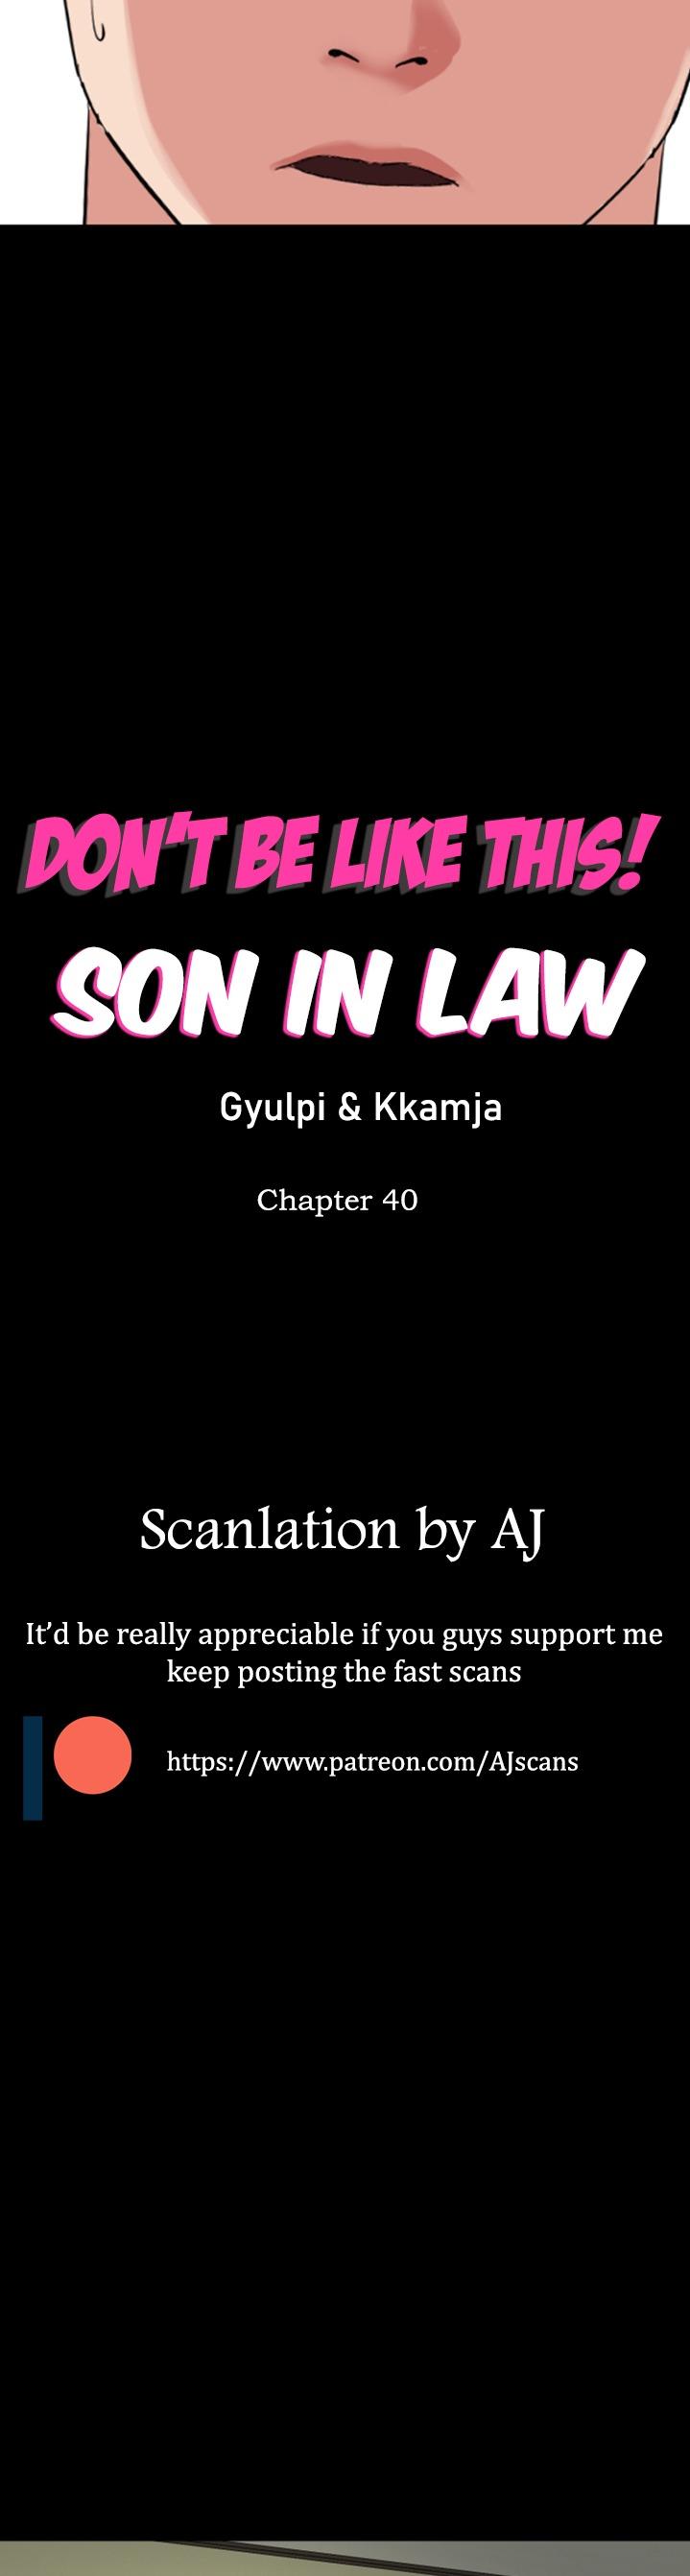 [Kkamja] Don't be like this son-in-law [English] 264